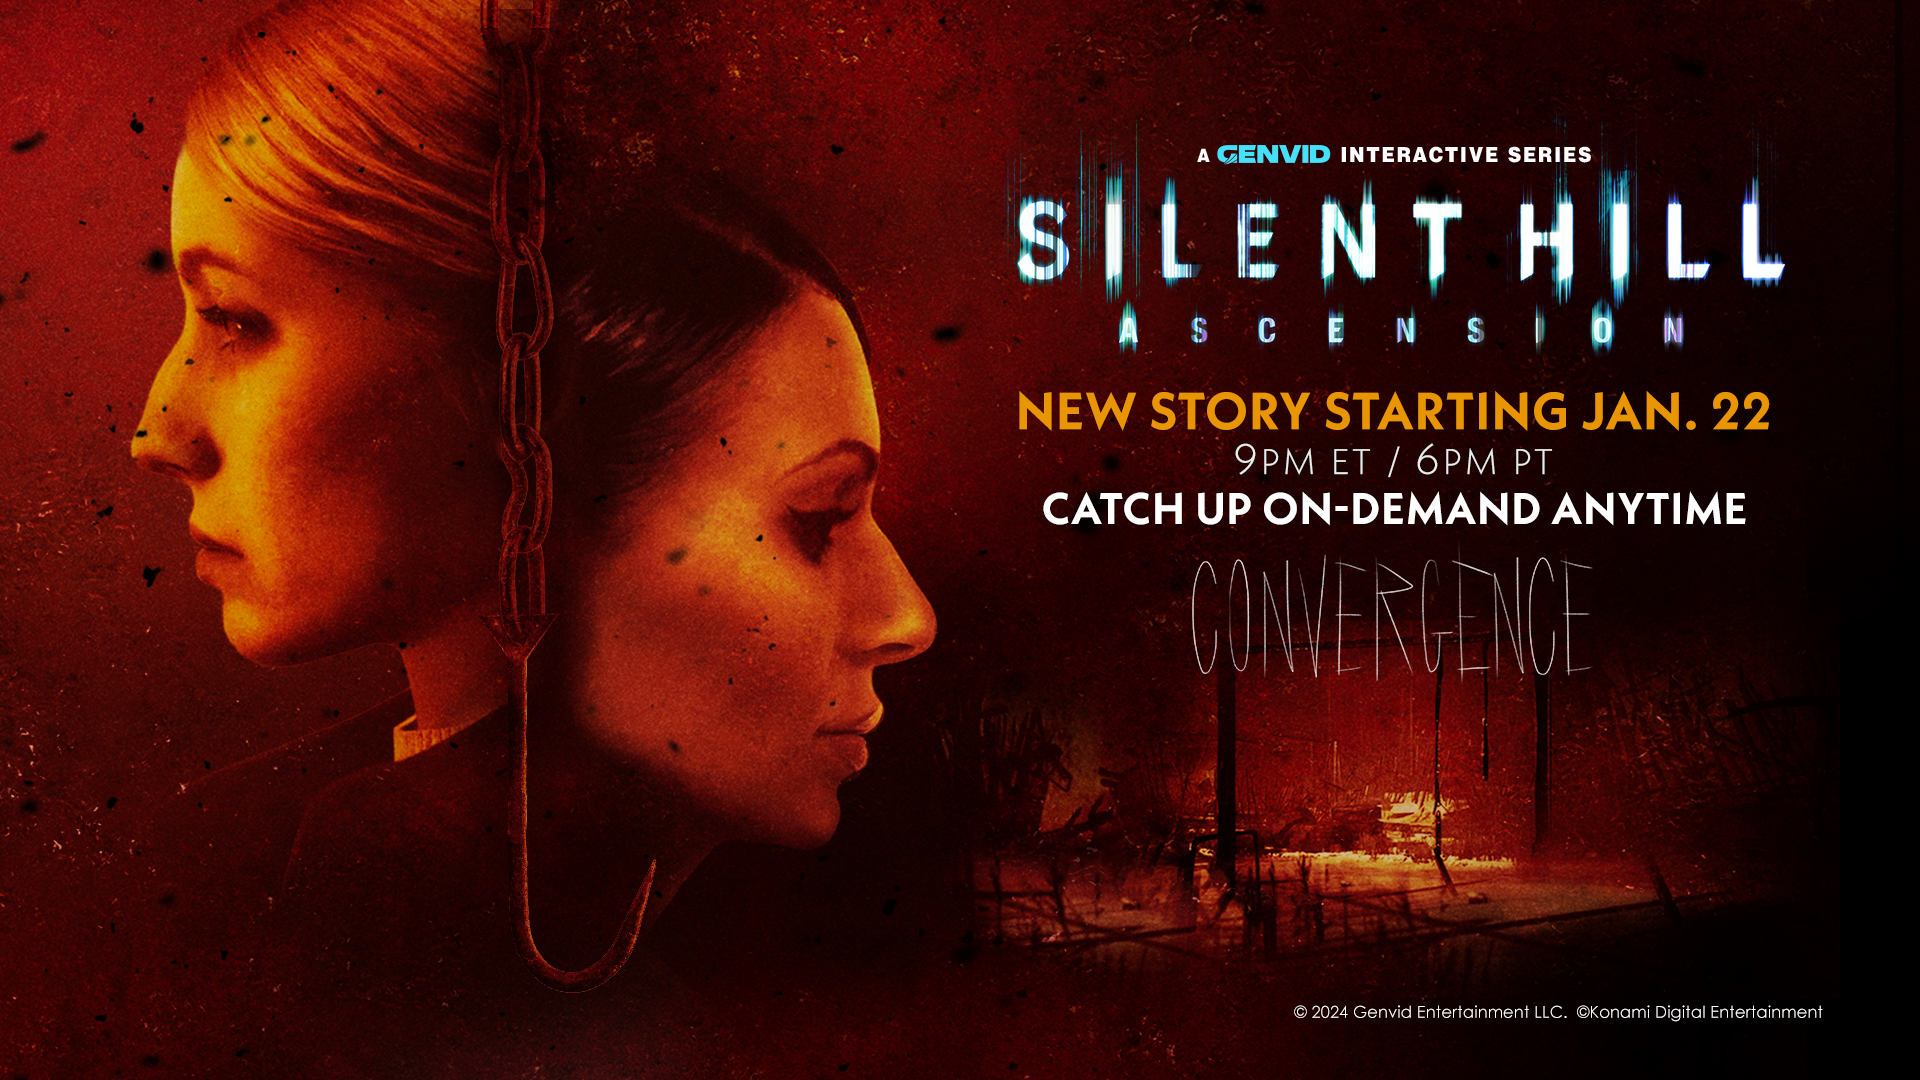 New SILENT HILL: Ascension story streaming weekdays starting Jan 22